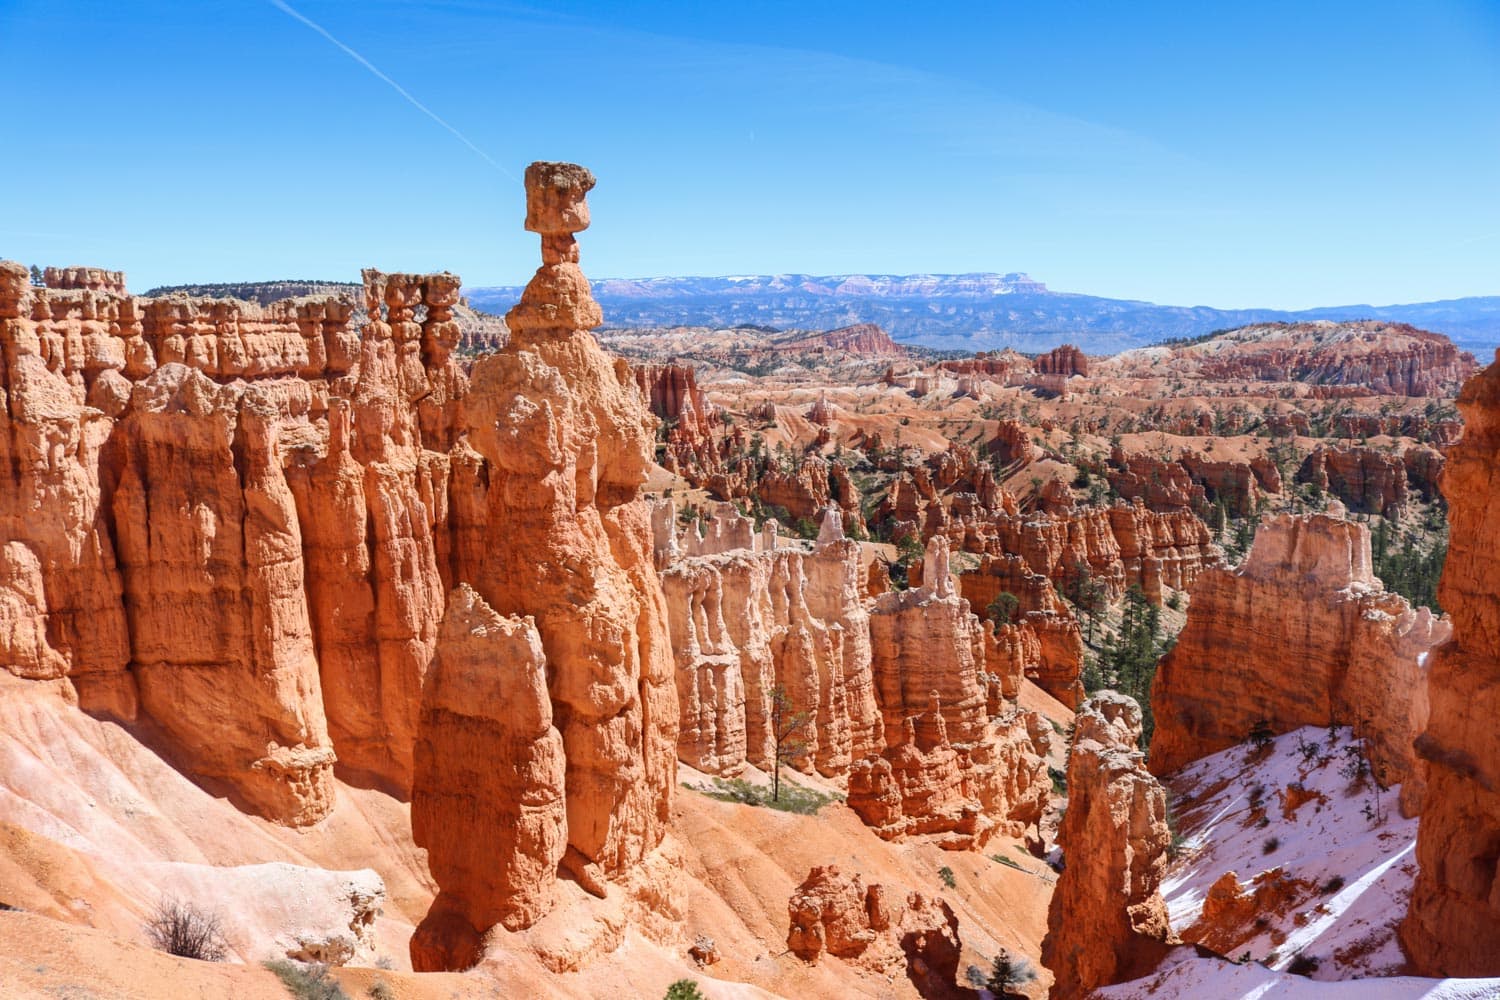 Thor's Hammer in Bryce Canyon National Park - Greatest National Parks Close to Las Vegas, Nevada